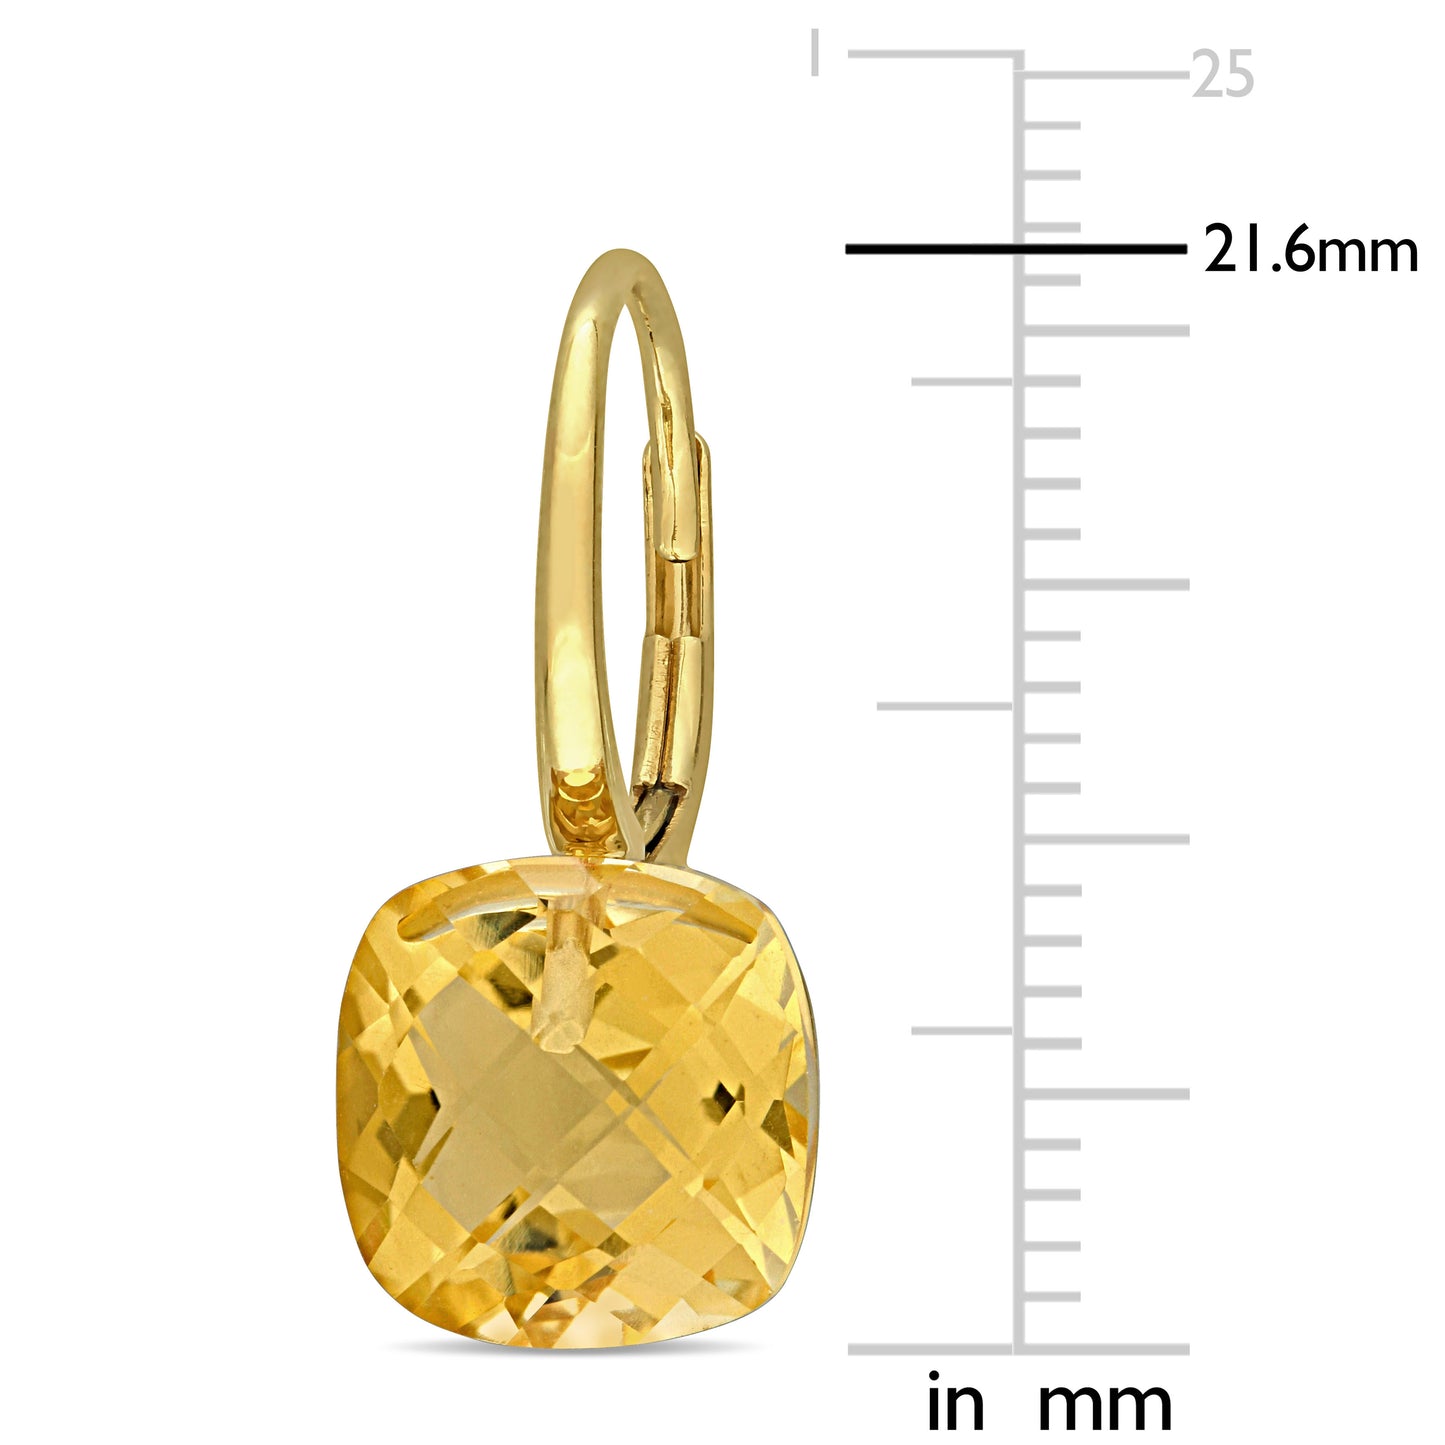 8ct Cushion Cut Citrine LeverBack Earrings in 14k Yellow Gold